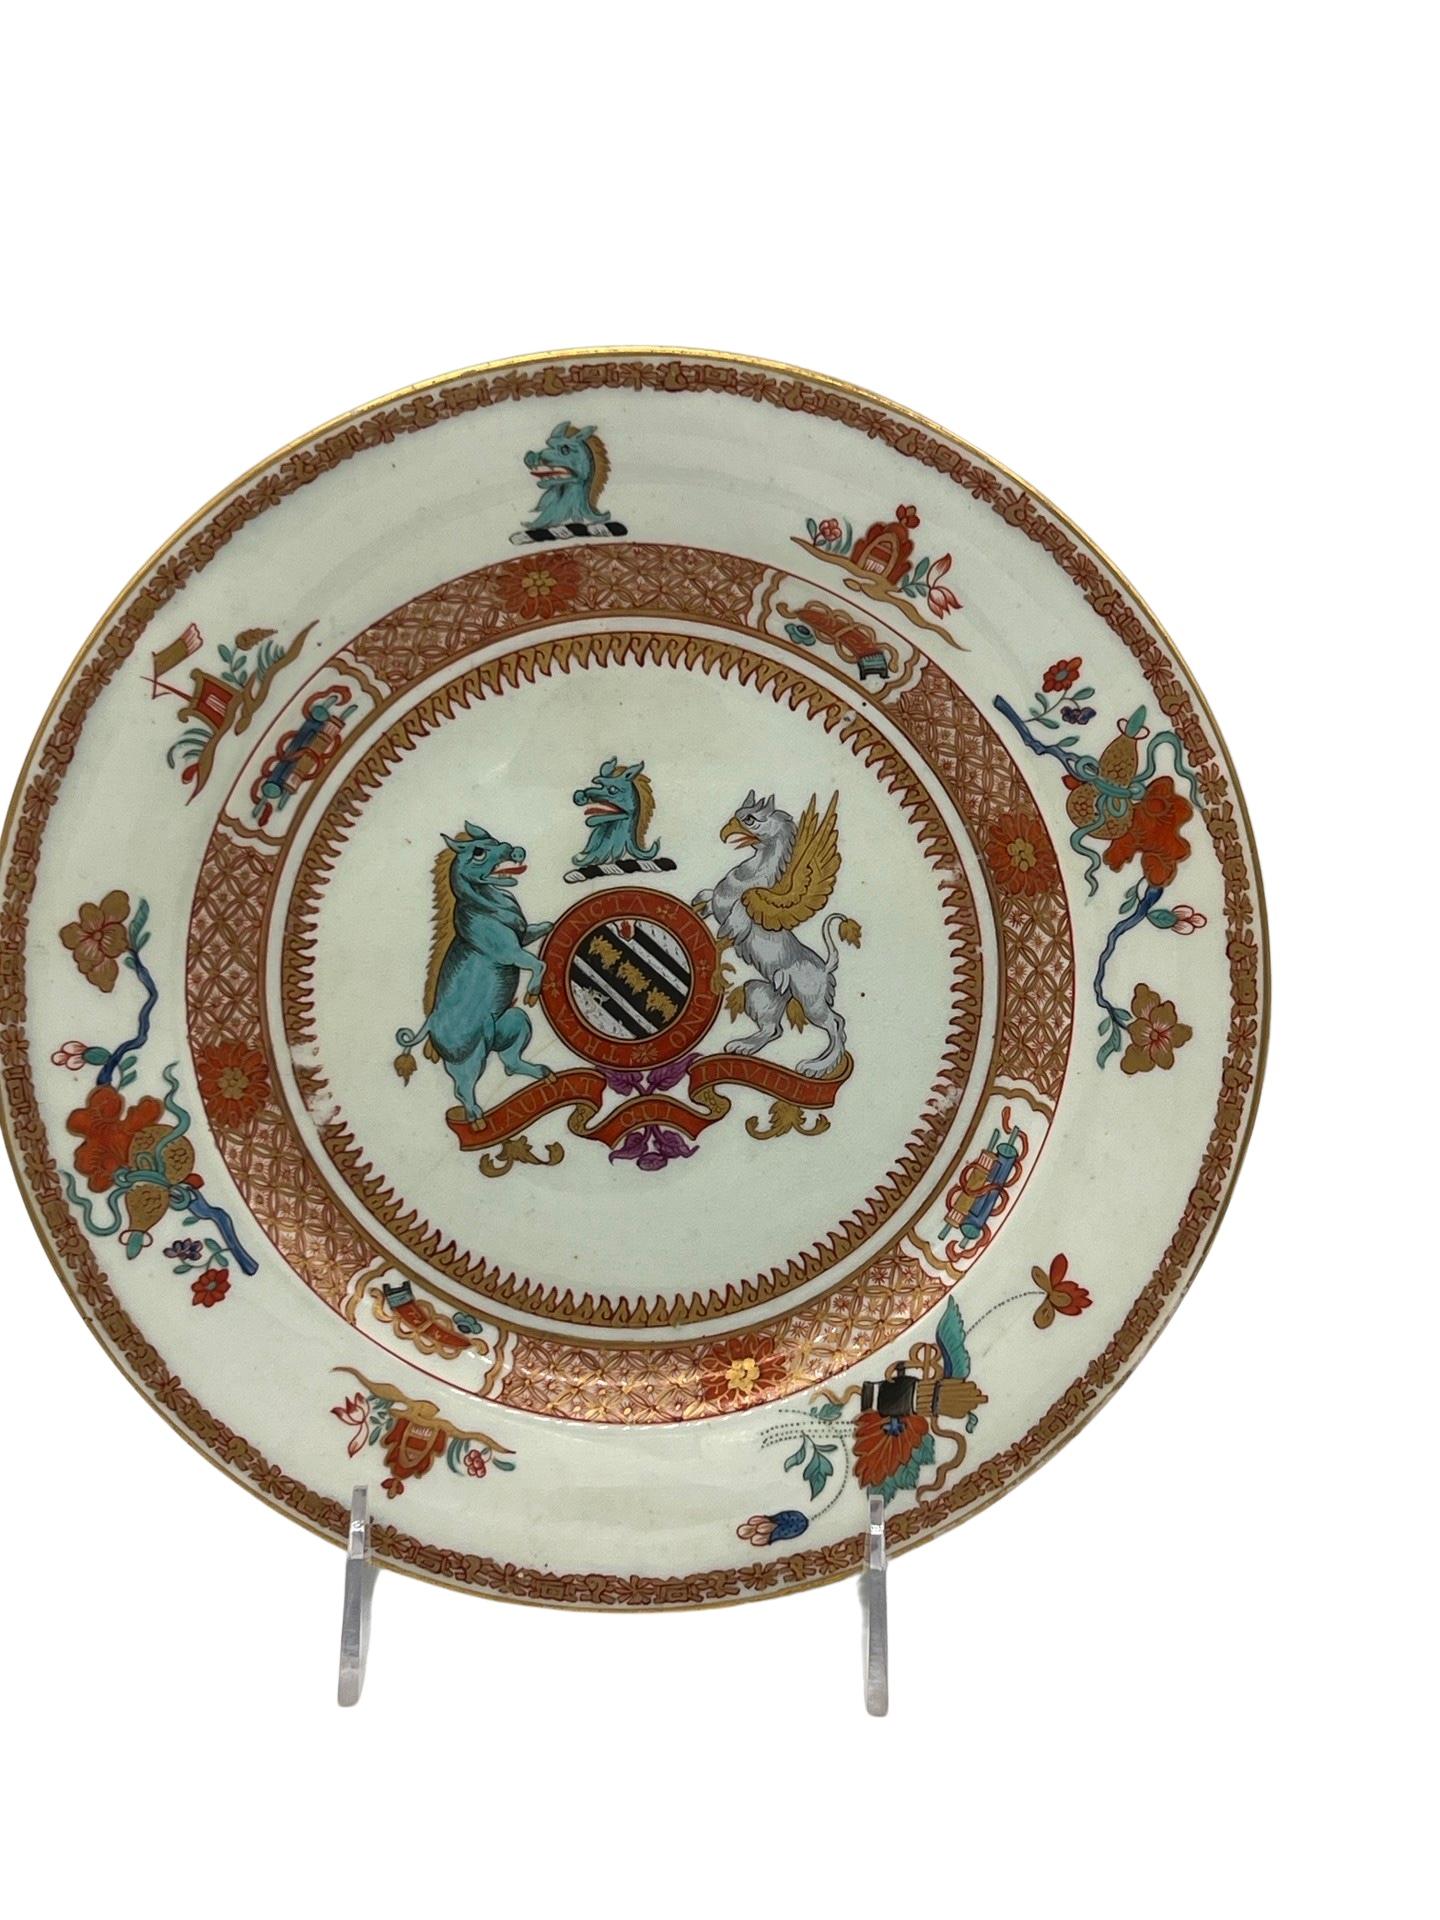 Pair, Chinese Export 'Yonge' Armorial Porcelain Plates Yongzhen Circa 1731 For Sale 1